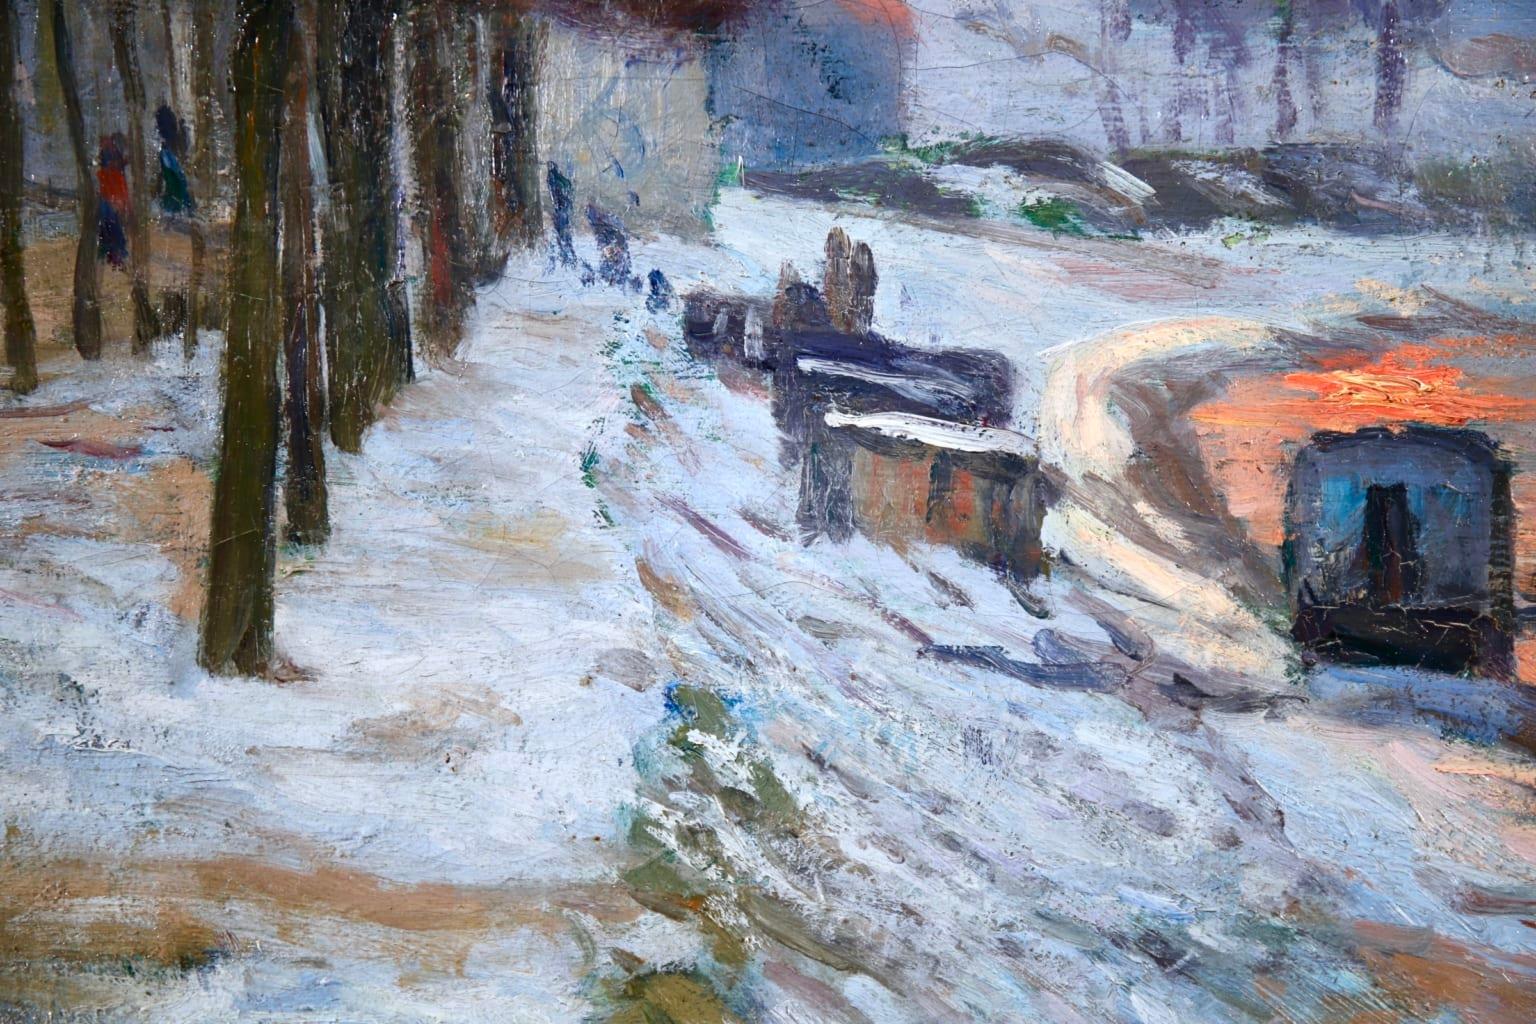 Snow on the Seine - Impressionist Winter River Landscape by Armand Guillaumin 2